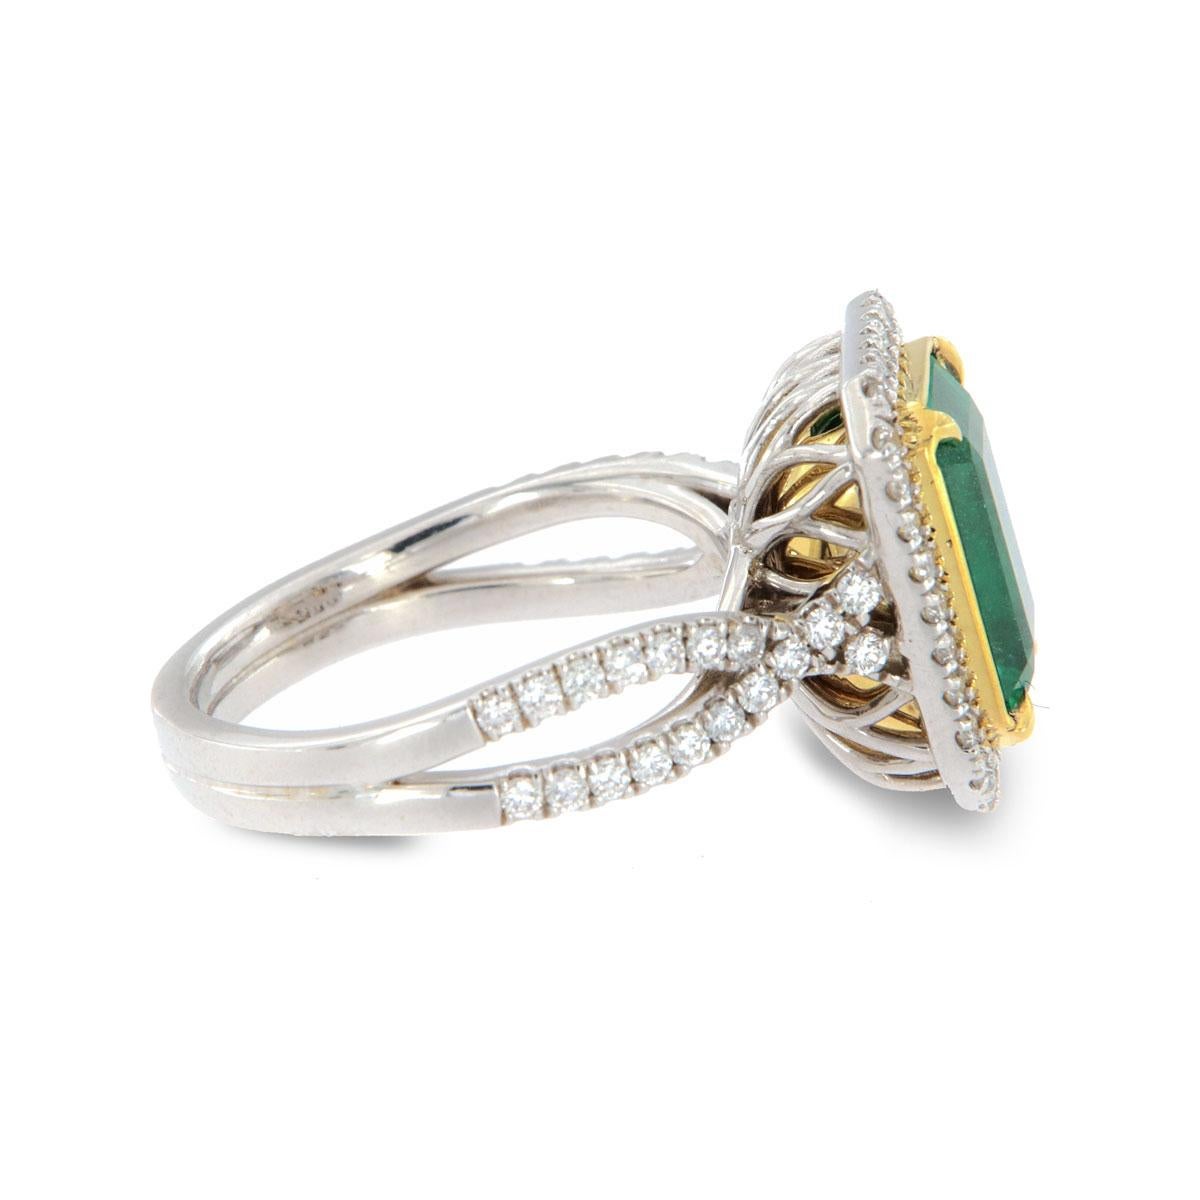 From our signature Gemstones collection of exquisite red carpet pieces, this handcrafted 18k Two-Tone gold ring is centering a 3.90 Carat of top quality Ethiopian rectangular green emerald in premium luster encircled by a halo of brilliant round